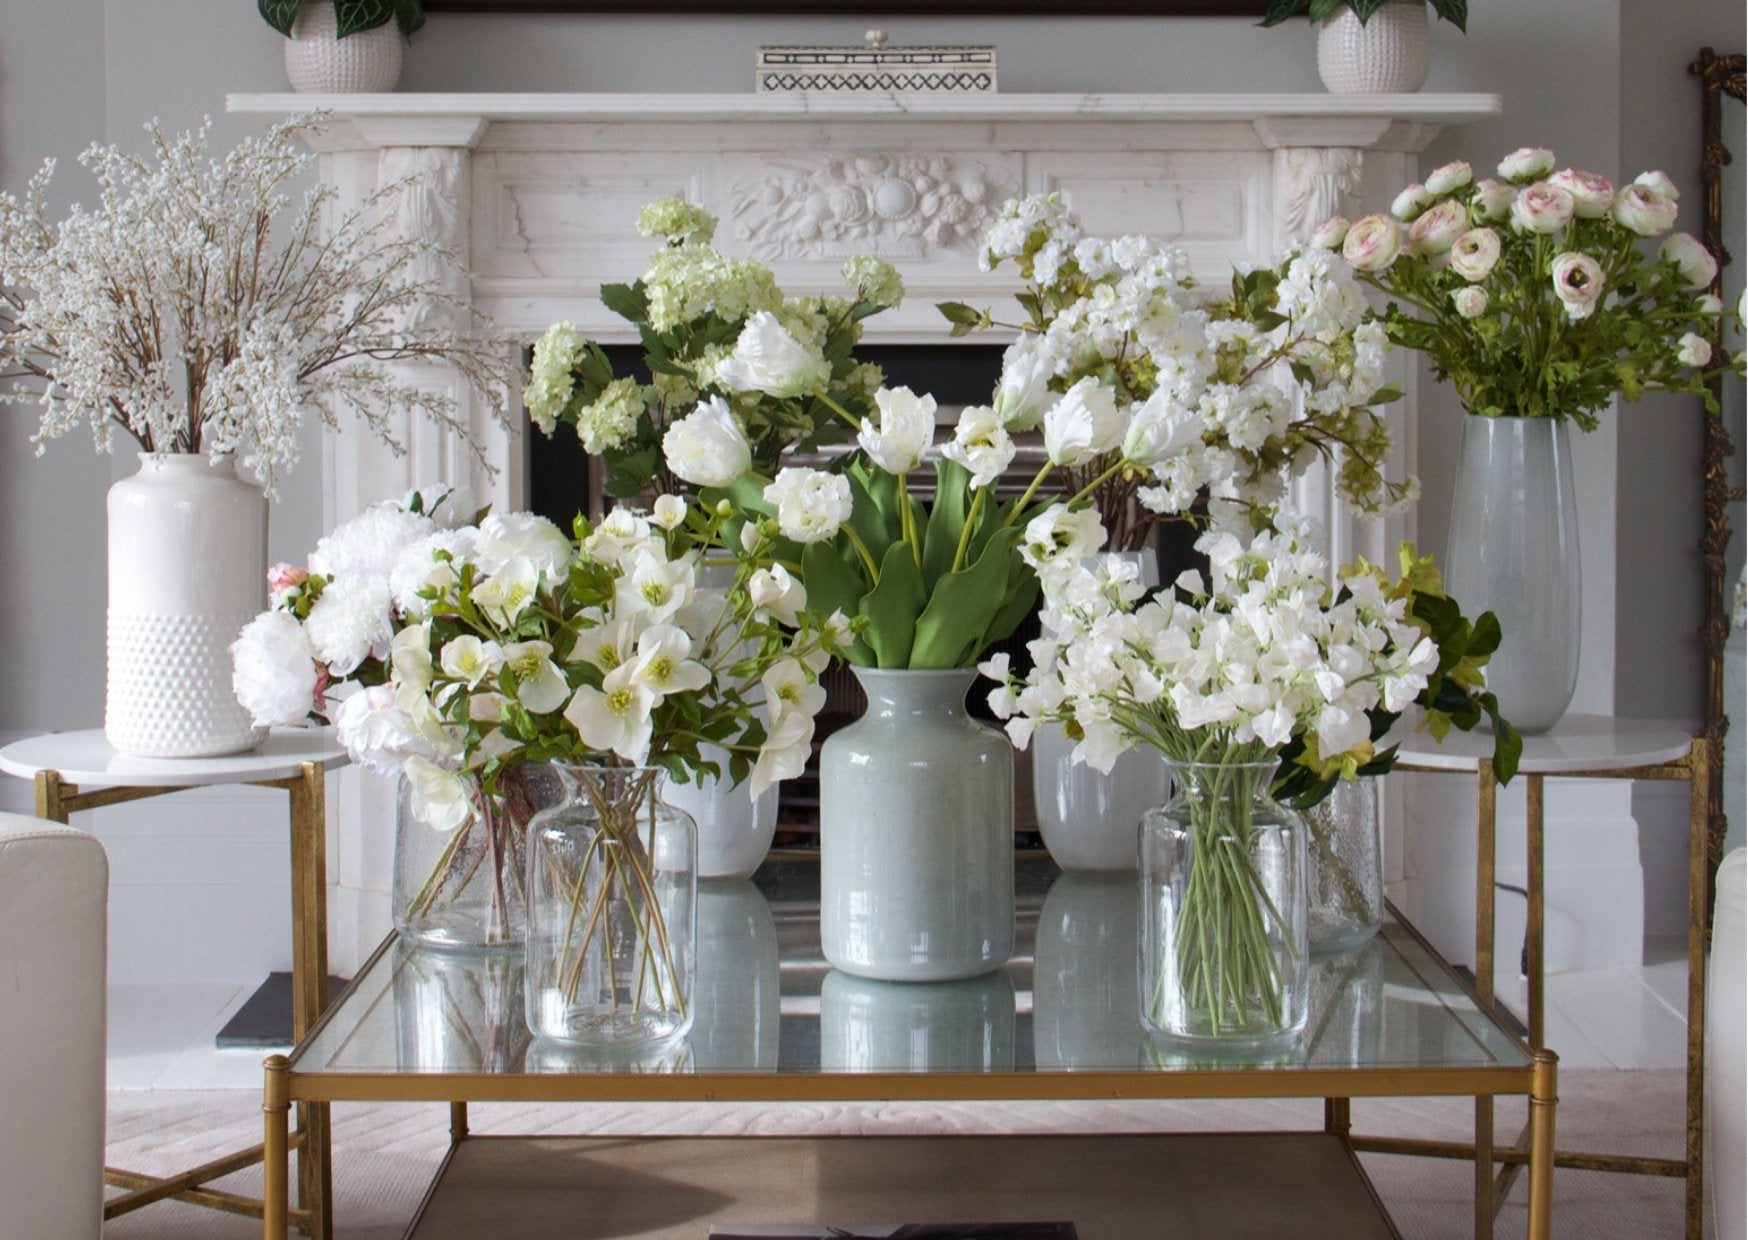 Flower Arrangements And Decor, Martin's Floral And Home Decor